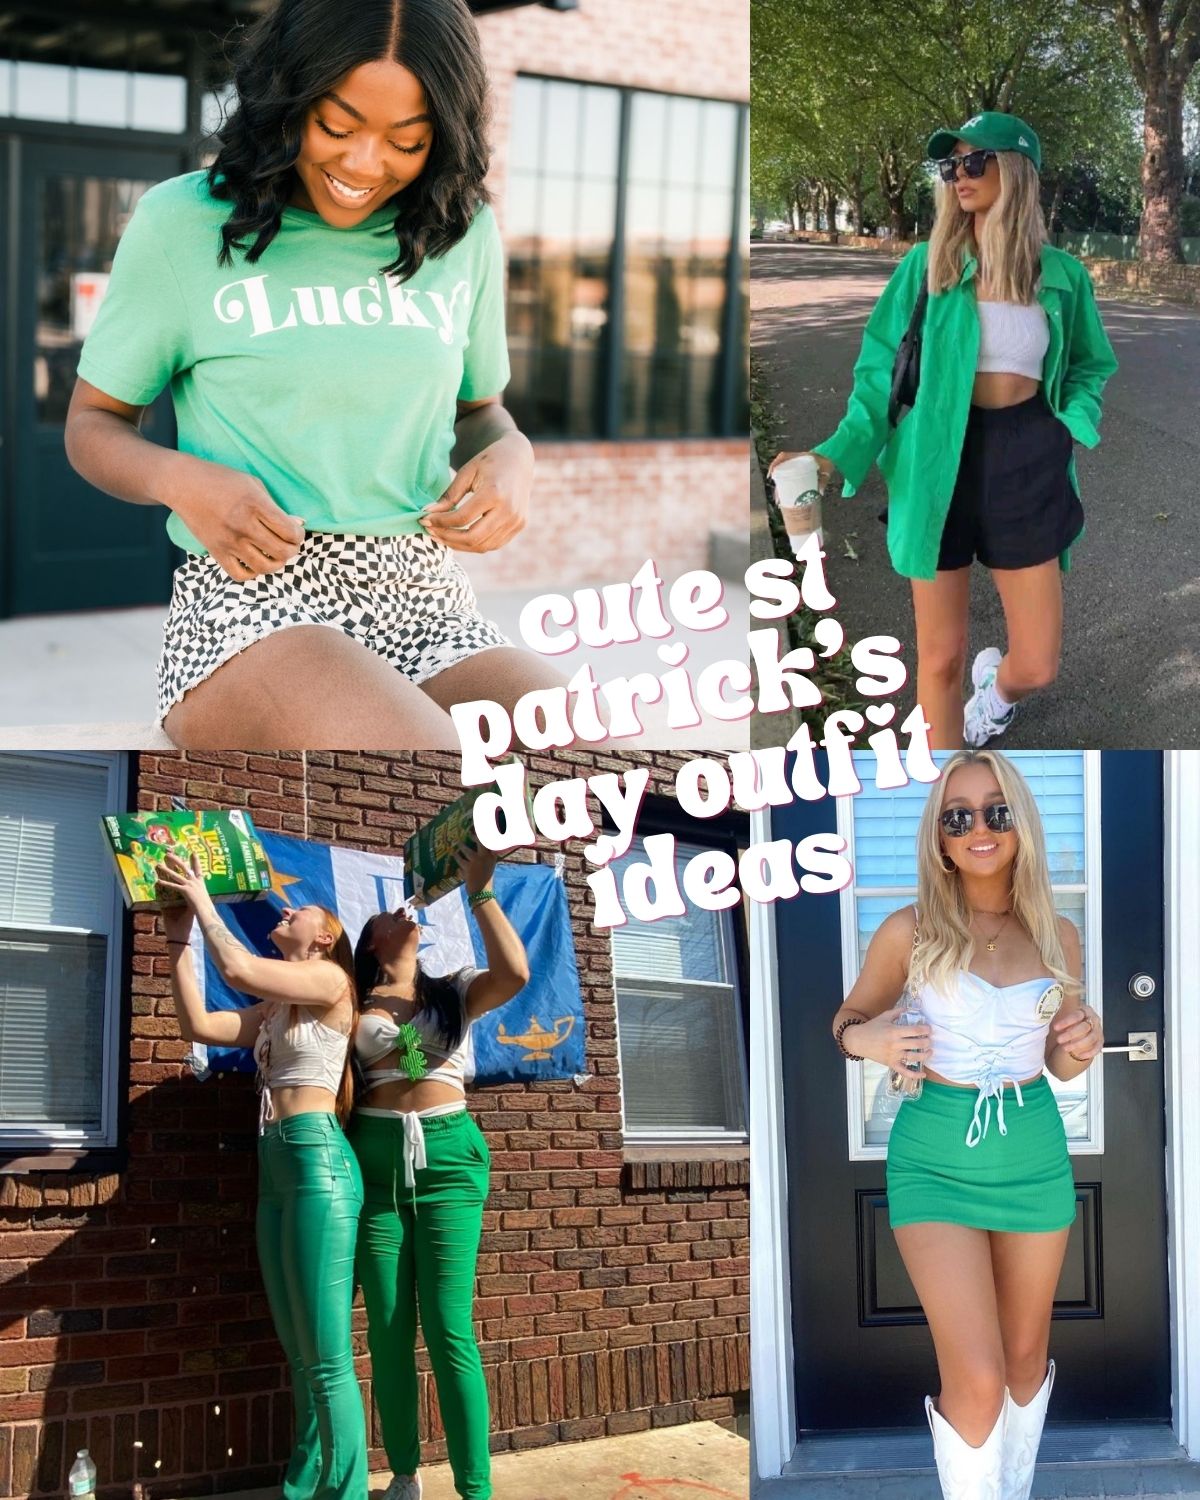 Four pictures of people dressed cute in green for st Patricks day